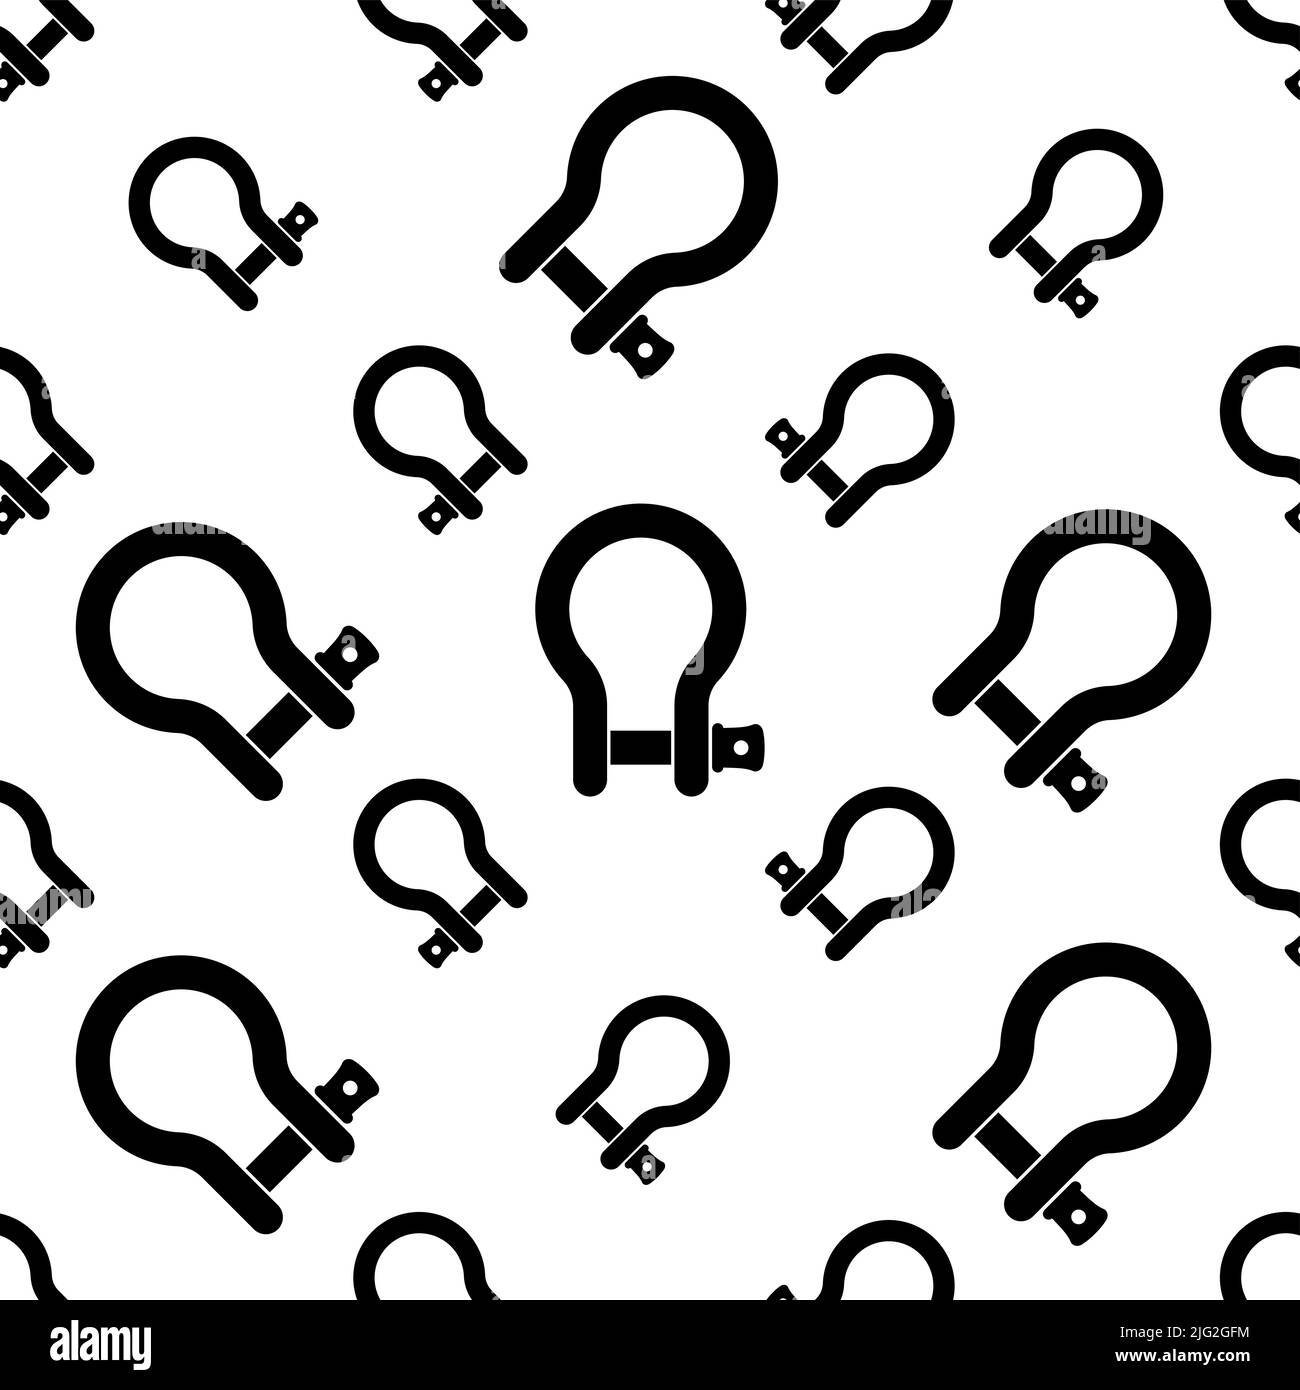 Shackle Icon Seamless Pattern, Gyve Icon, U Shaped Piece Of Metal With A Clevis Pin, Bolt Vector Art Illustration Stock Vector